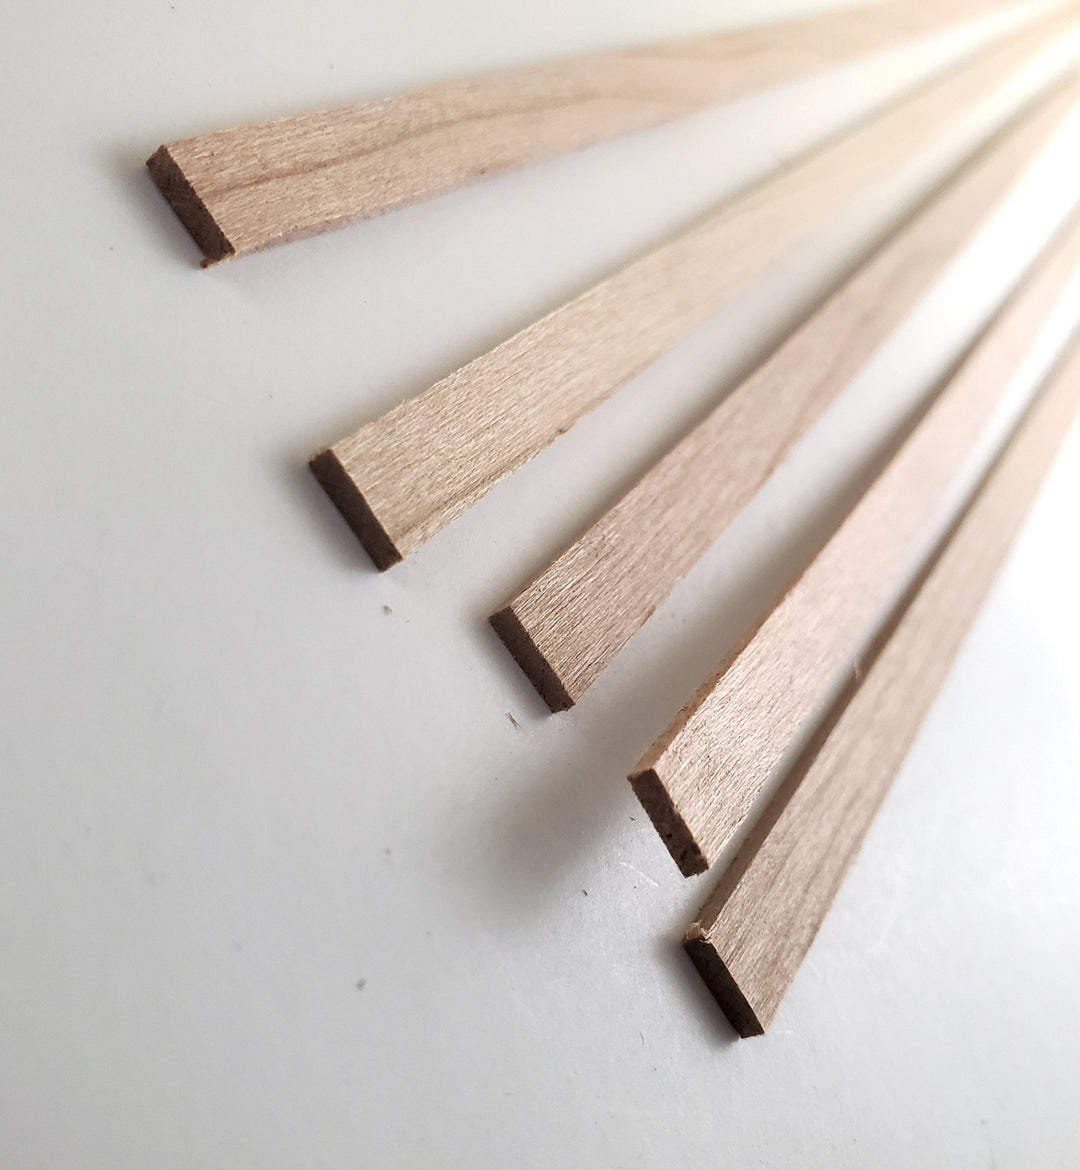 Cherry Wood Strips 5 Pieces 1/8 X 1/4 X 18 Long Crafts Models Miniatures 